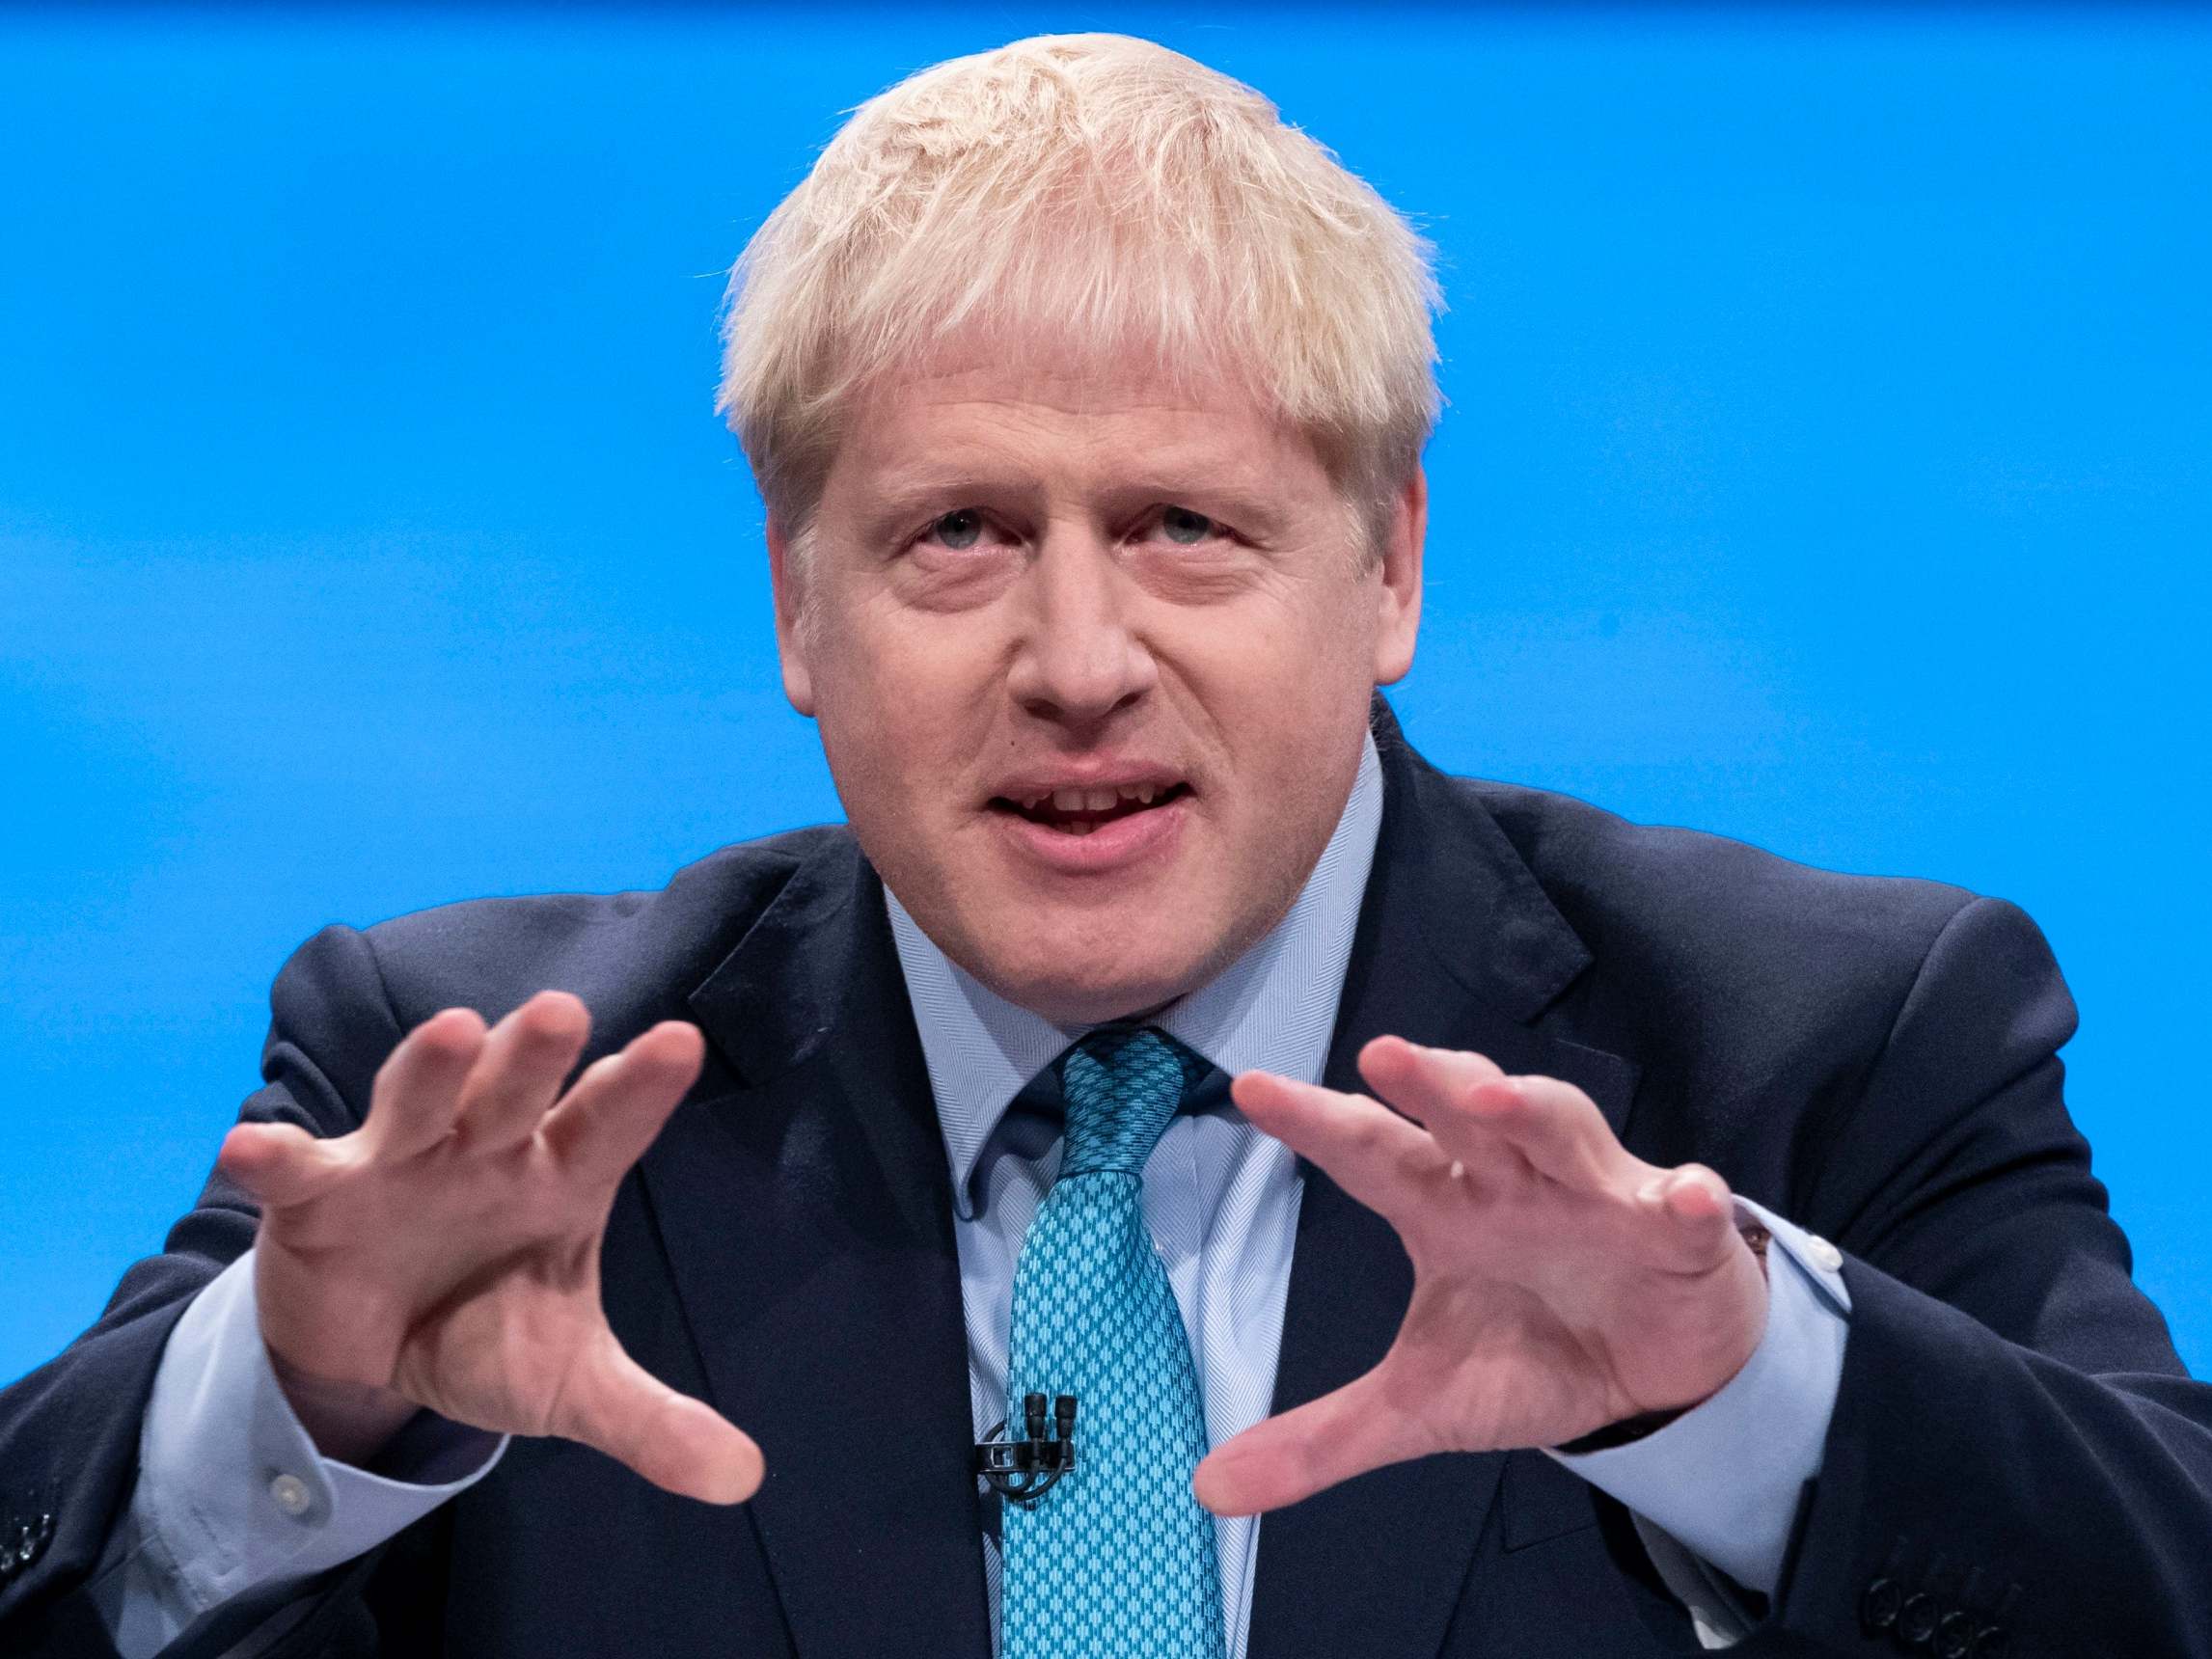 MPs cheered lustily when Johnson vowed to ‘get Brexit done’ in his conference speech